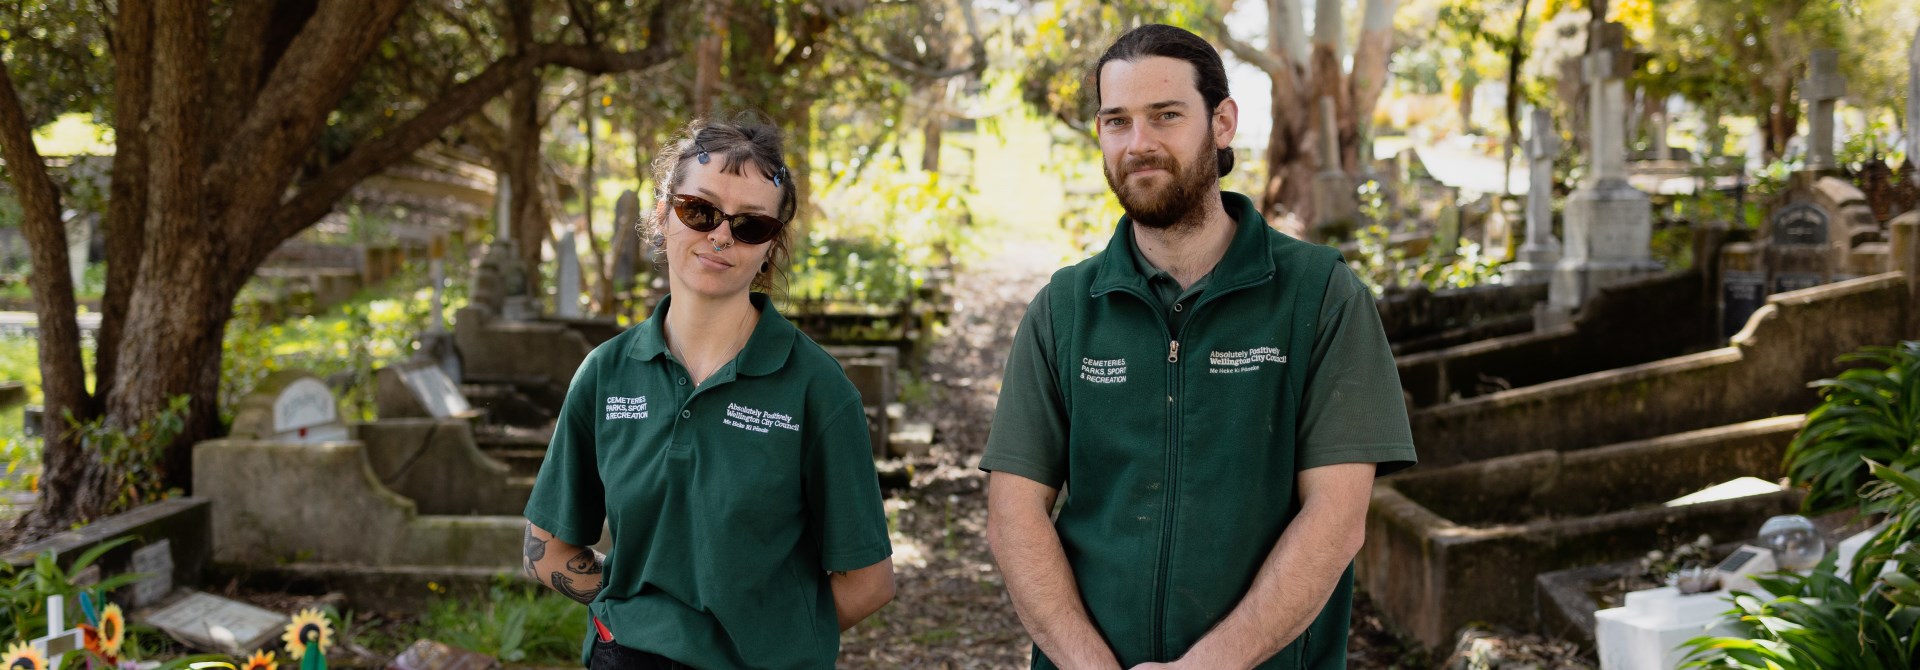 Taylor and Jayden stand in their green polo shirt uniforms under the trees in a cemetery.